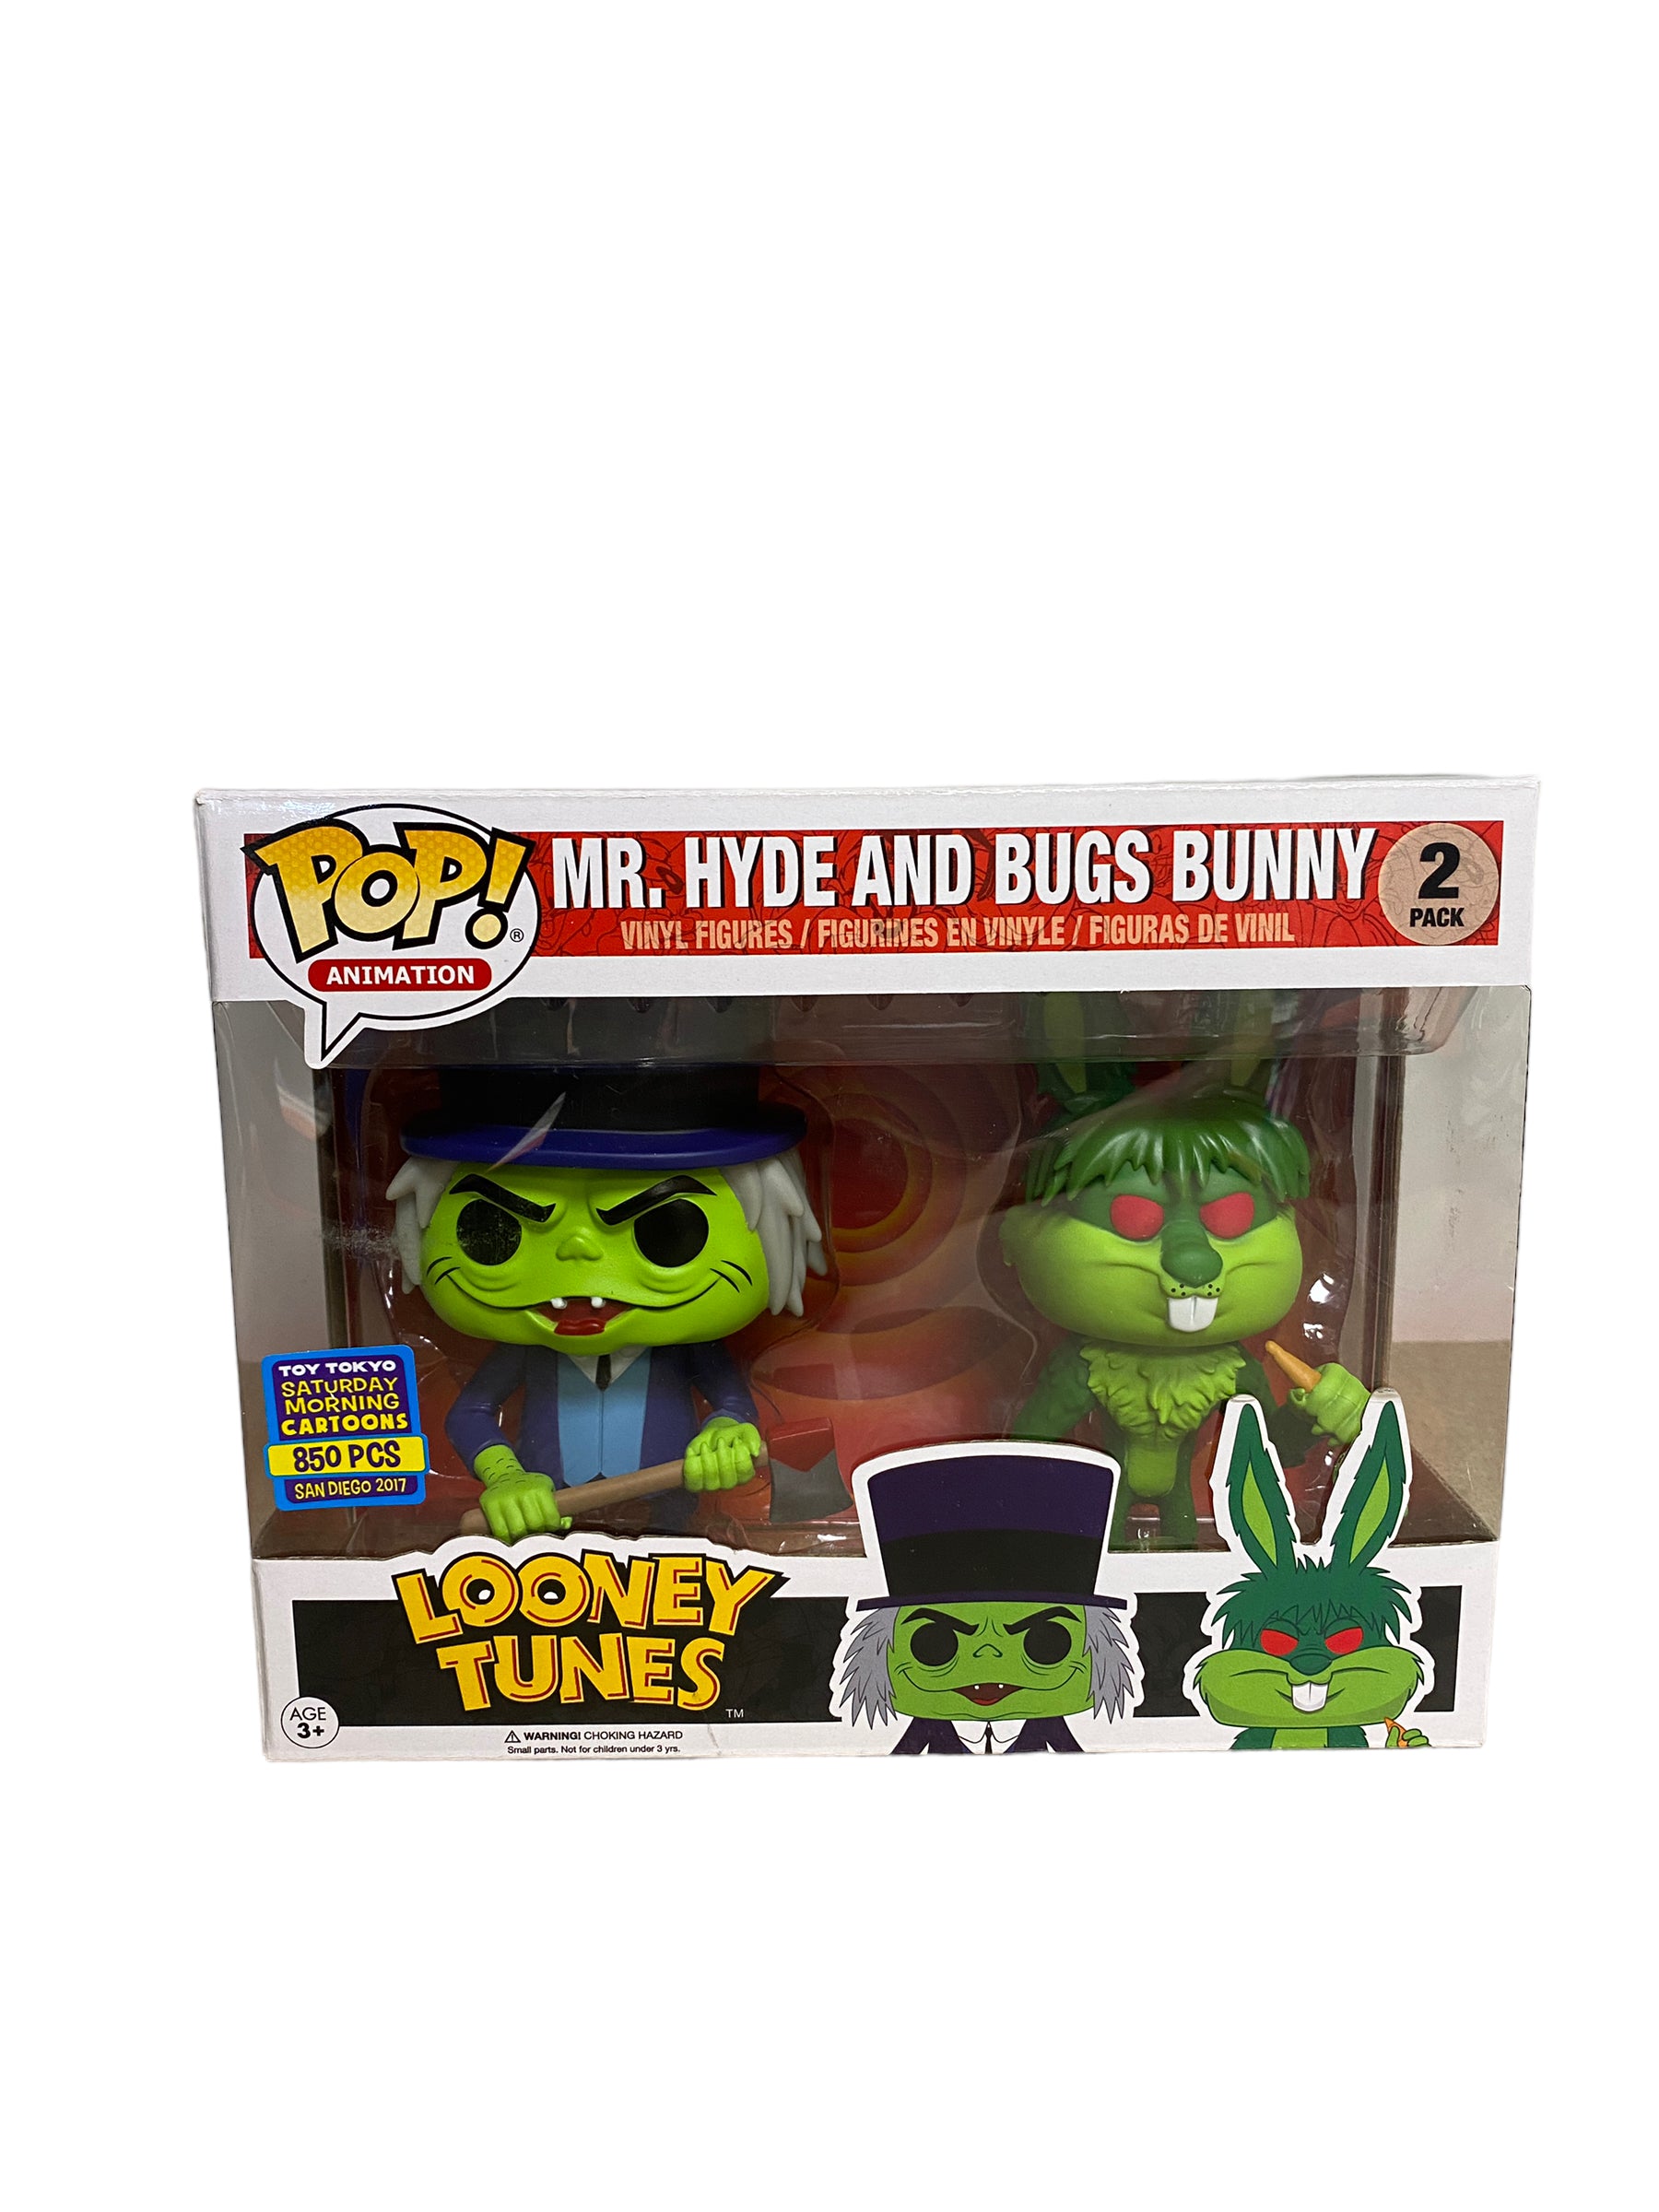 Mr. Hyde and Bugs Bunny 2 Pack Funko Pop! - Looney Tunes - SDCC 2017 Toy Tokyo Exclusive LE850 Pcs - Condition 8.5/10